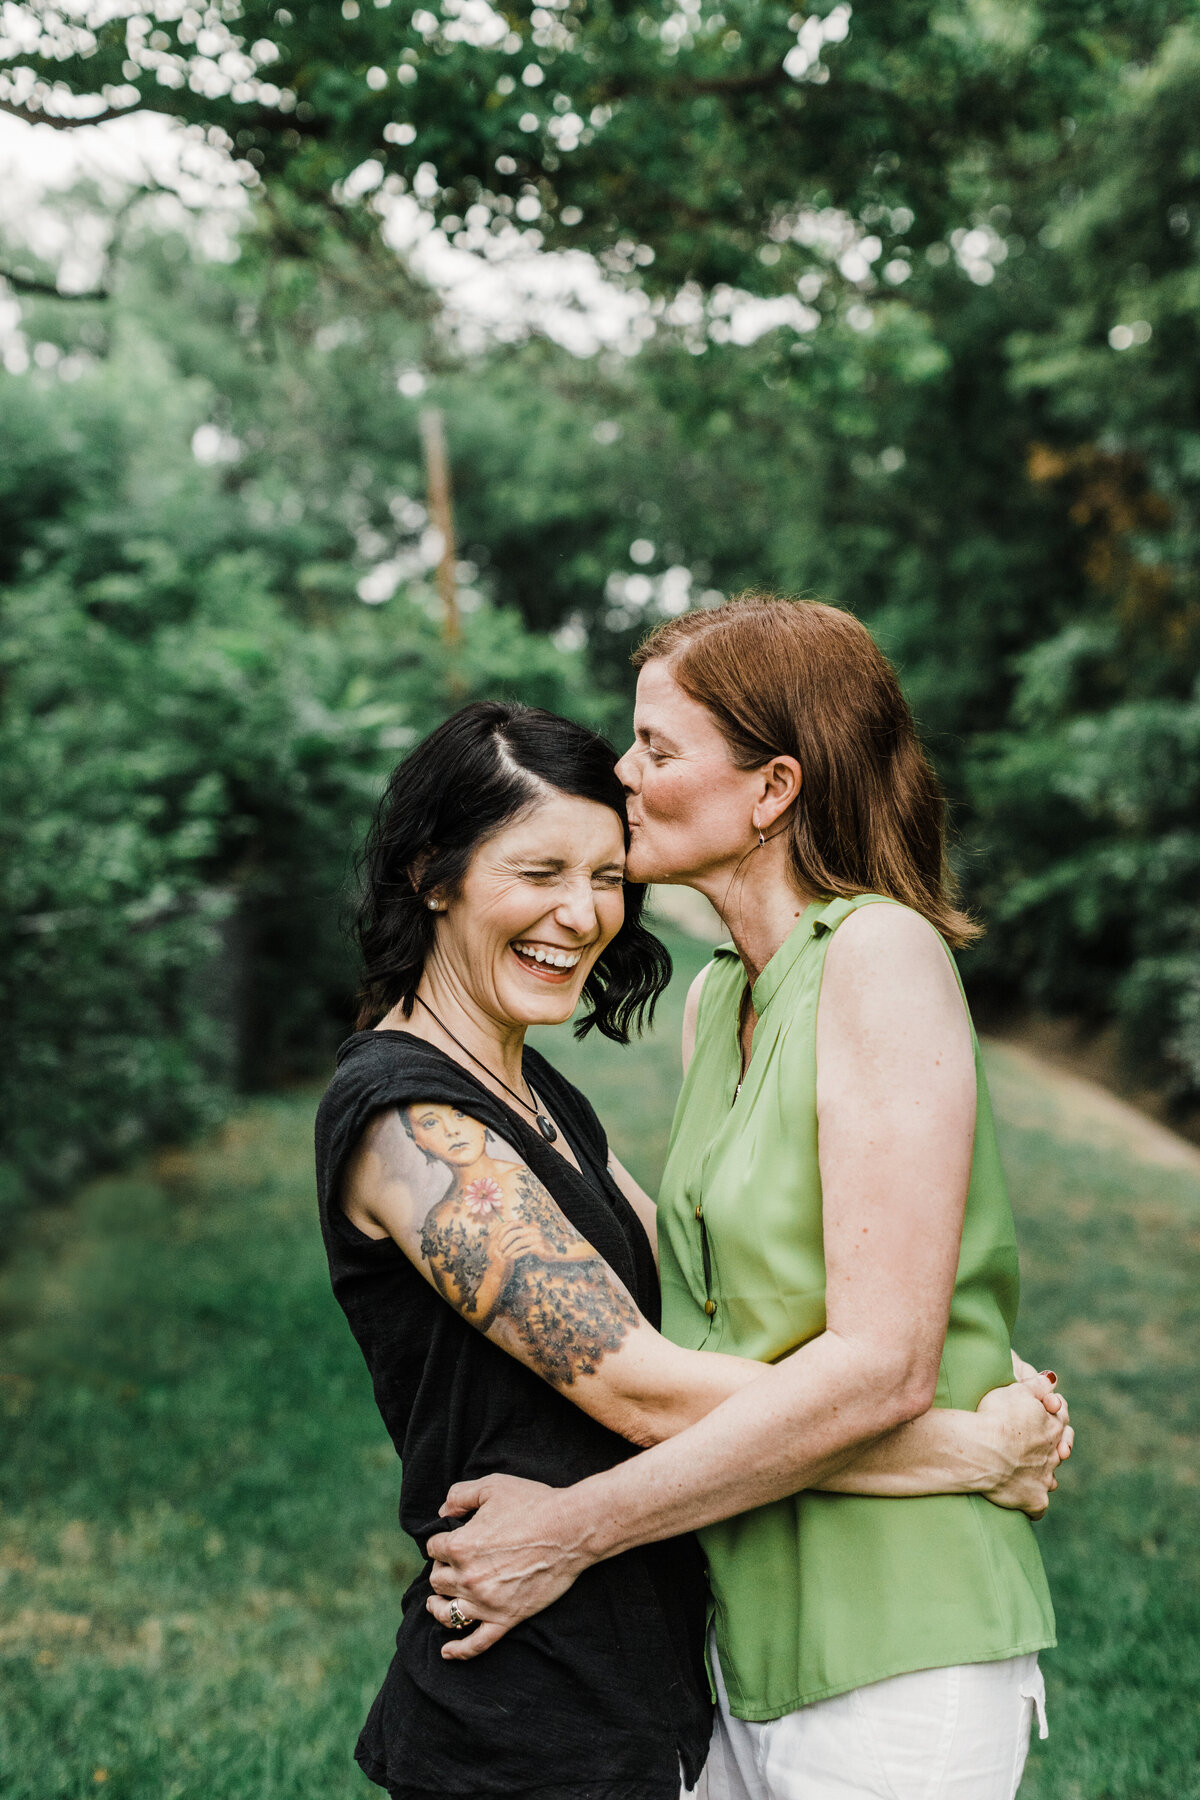 Two women holding each other close with one laughing while the other gives her a kiss on the forehead during their engagement session in DFW, Texas. The woman on the right is wearing a sleeveless green blouse and white pants while the woman on the left is wearing a sleeveless black blouse and has a half sleeve of tattoos on her arm. They are backed by many trees and other greenery.